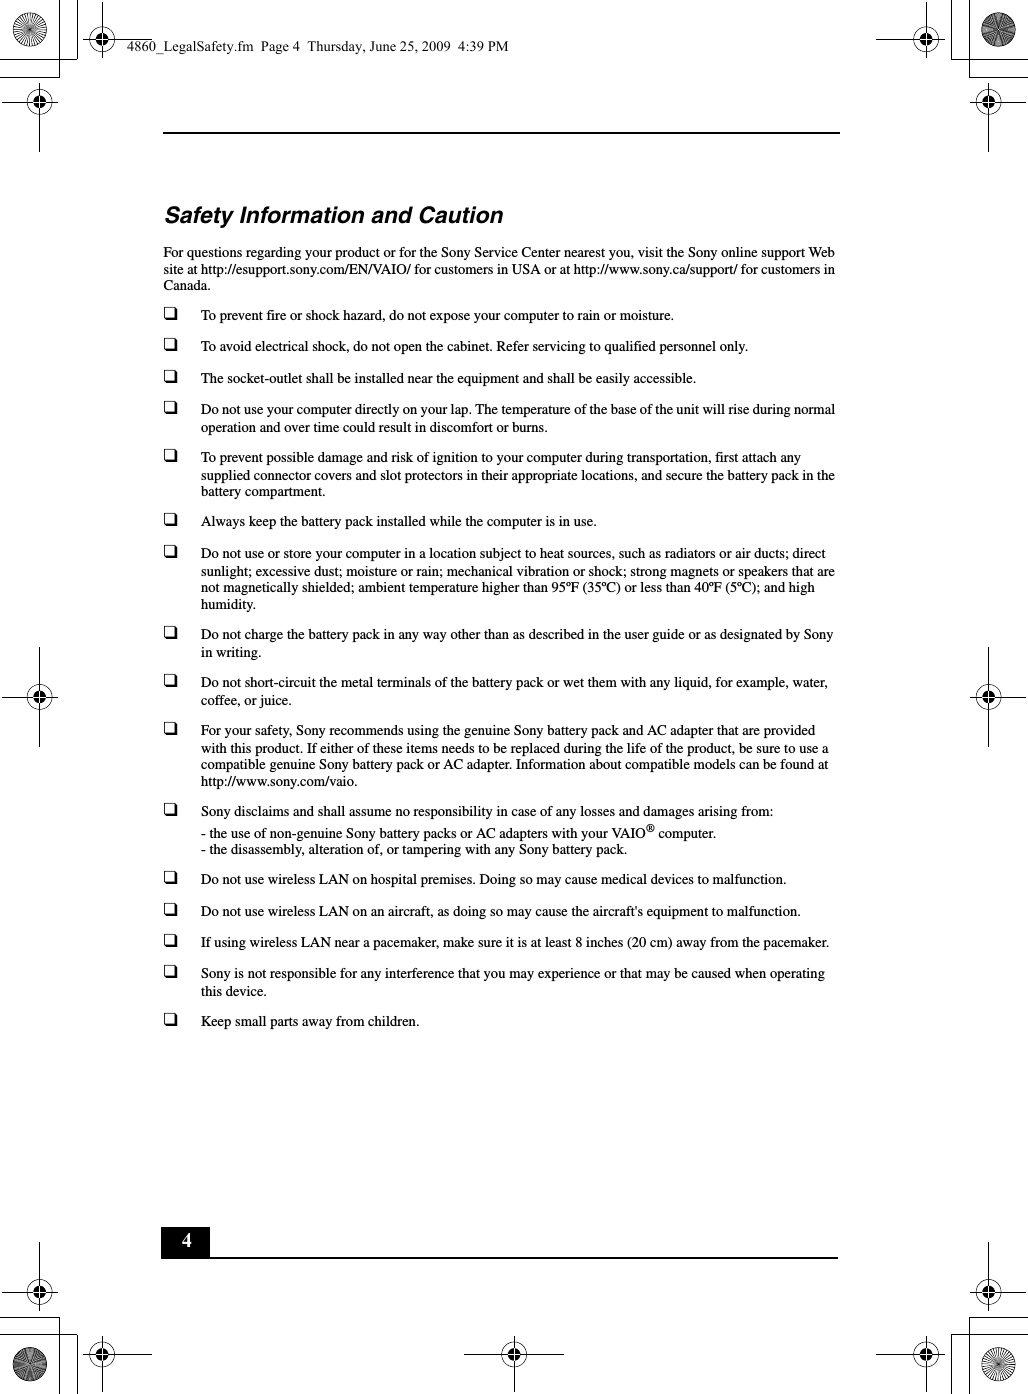 4Safety Information and CautionFor questions regarding your product or for the Sony Service Center nearest you, visit the Sony online support Web site at http://esupport.sony.com/EN/VAIO/ for customers in USA or at http://www.sony.ca/support/ for customers in Canada.❑To prevent fire or shock hazard, do not expose your computer to rain or moisture.❑To avoid electrical shock, do not open the cabinet. Refer servicing to qualified personnel only.❑The socket-outlet shall be installed near the equipment and shall be easily accessible.❑Do not use your computer directly on your lap. The temperature of the base of the unit will rise during normal operation and over time could result in discomfort or burns.❑To prevent possible damage and risk of ignition to your computer during transportation, first attach any supplied connector covers and slot protectors in their appropriate locations, and secure the battery pack in the battery compartment.❑Always keep the battery pack installed while the computer is in use.❑Do not use or store your computer in a location subject to heat sources, such as radiators or air ducts; direct sunlight; excessive dust; moisture or rain; mechanical vibration or shock; strong magnets or speakers that are not magnetically shielded; ambient temperature higher than 95ºF (35ºC) or less than 40ºF (5ºC); and high humidity.❑Do not charge the battery pack in any way other than as described in the user guide or as designated by Sony in writing.❑Do not short-circuit the metal terminals of the battery pack or wet them with any liquid, for example, water, coffee, or juice.❑For your safety, Sony recommends using the genuine Sony battery pack and AC adapter that are provided with this product. If either of these items needs to be replaced during the life of the product, be sure to use a compatible genuine Sony battery pack or AC adapter. Information about compatible models can be found at http://www.sony.com/vaio.❑Sony disclaims and shall assume no responsibility in case of any losses and damages arising from:- the use of non-genuine Sony battery packs or AC adapters with your VAIO® computer.- the disassembly, alteration of, or tampering with any Sony battery pack.❑Do not use wireless LAN on hospital premises. Doing so may cause medical devices to malfunction.❑Do not use wireless LAN on an aircraft, as doing so may cause the aircraft&apos;s equipment to malfunction.❑If using wireless LAN near a pacemaker, make sure it is at least 8 inches (20 cm) away from the pacemaker.❑Sony is not responsible for any interference that you may experience or that may be caused when operating this device.❑Keep small parts away from children.4860_LegalSafety.fm  Page 4  Thursday, June 25, 2009  4:39 PM